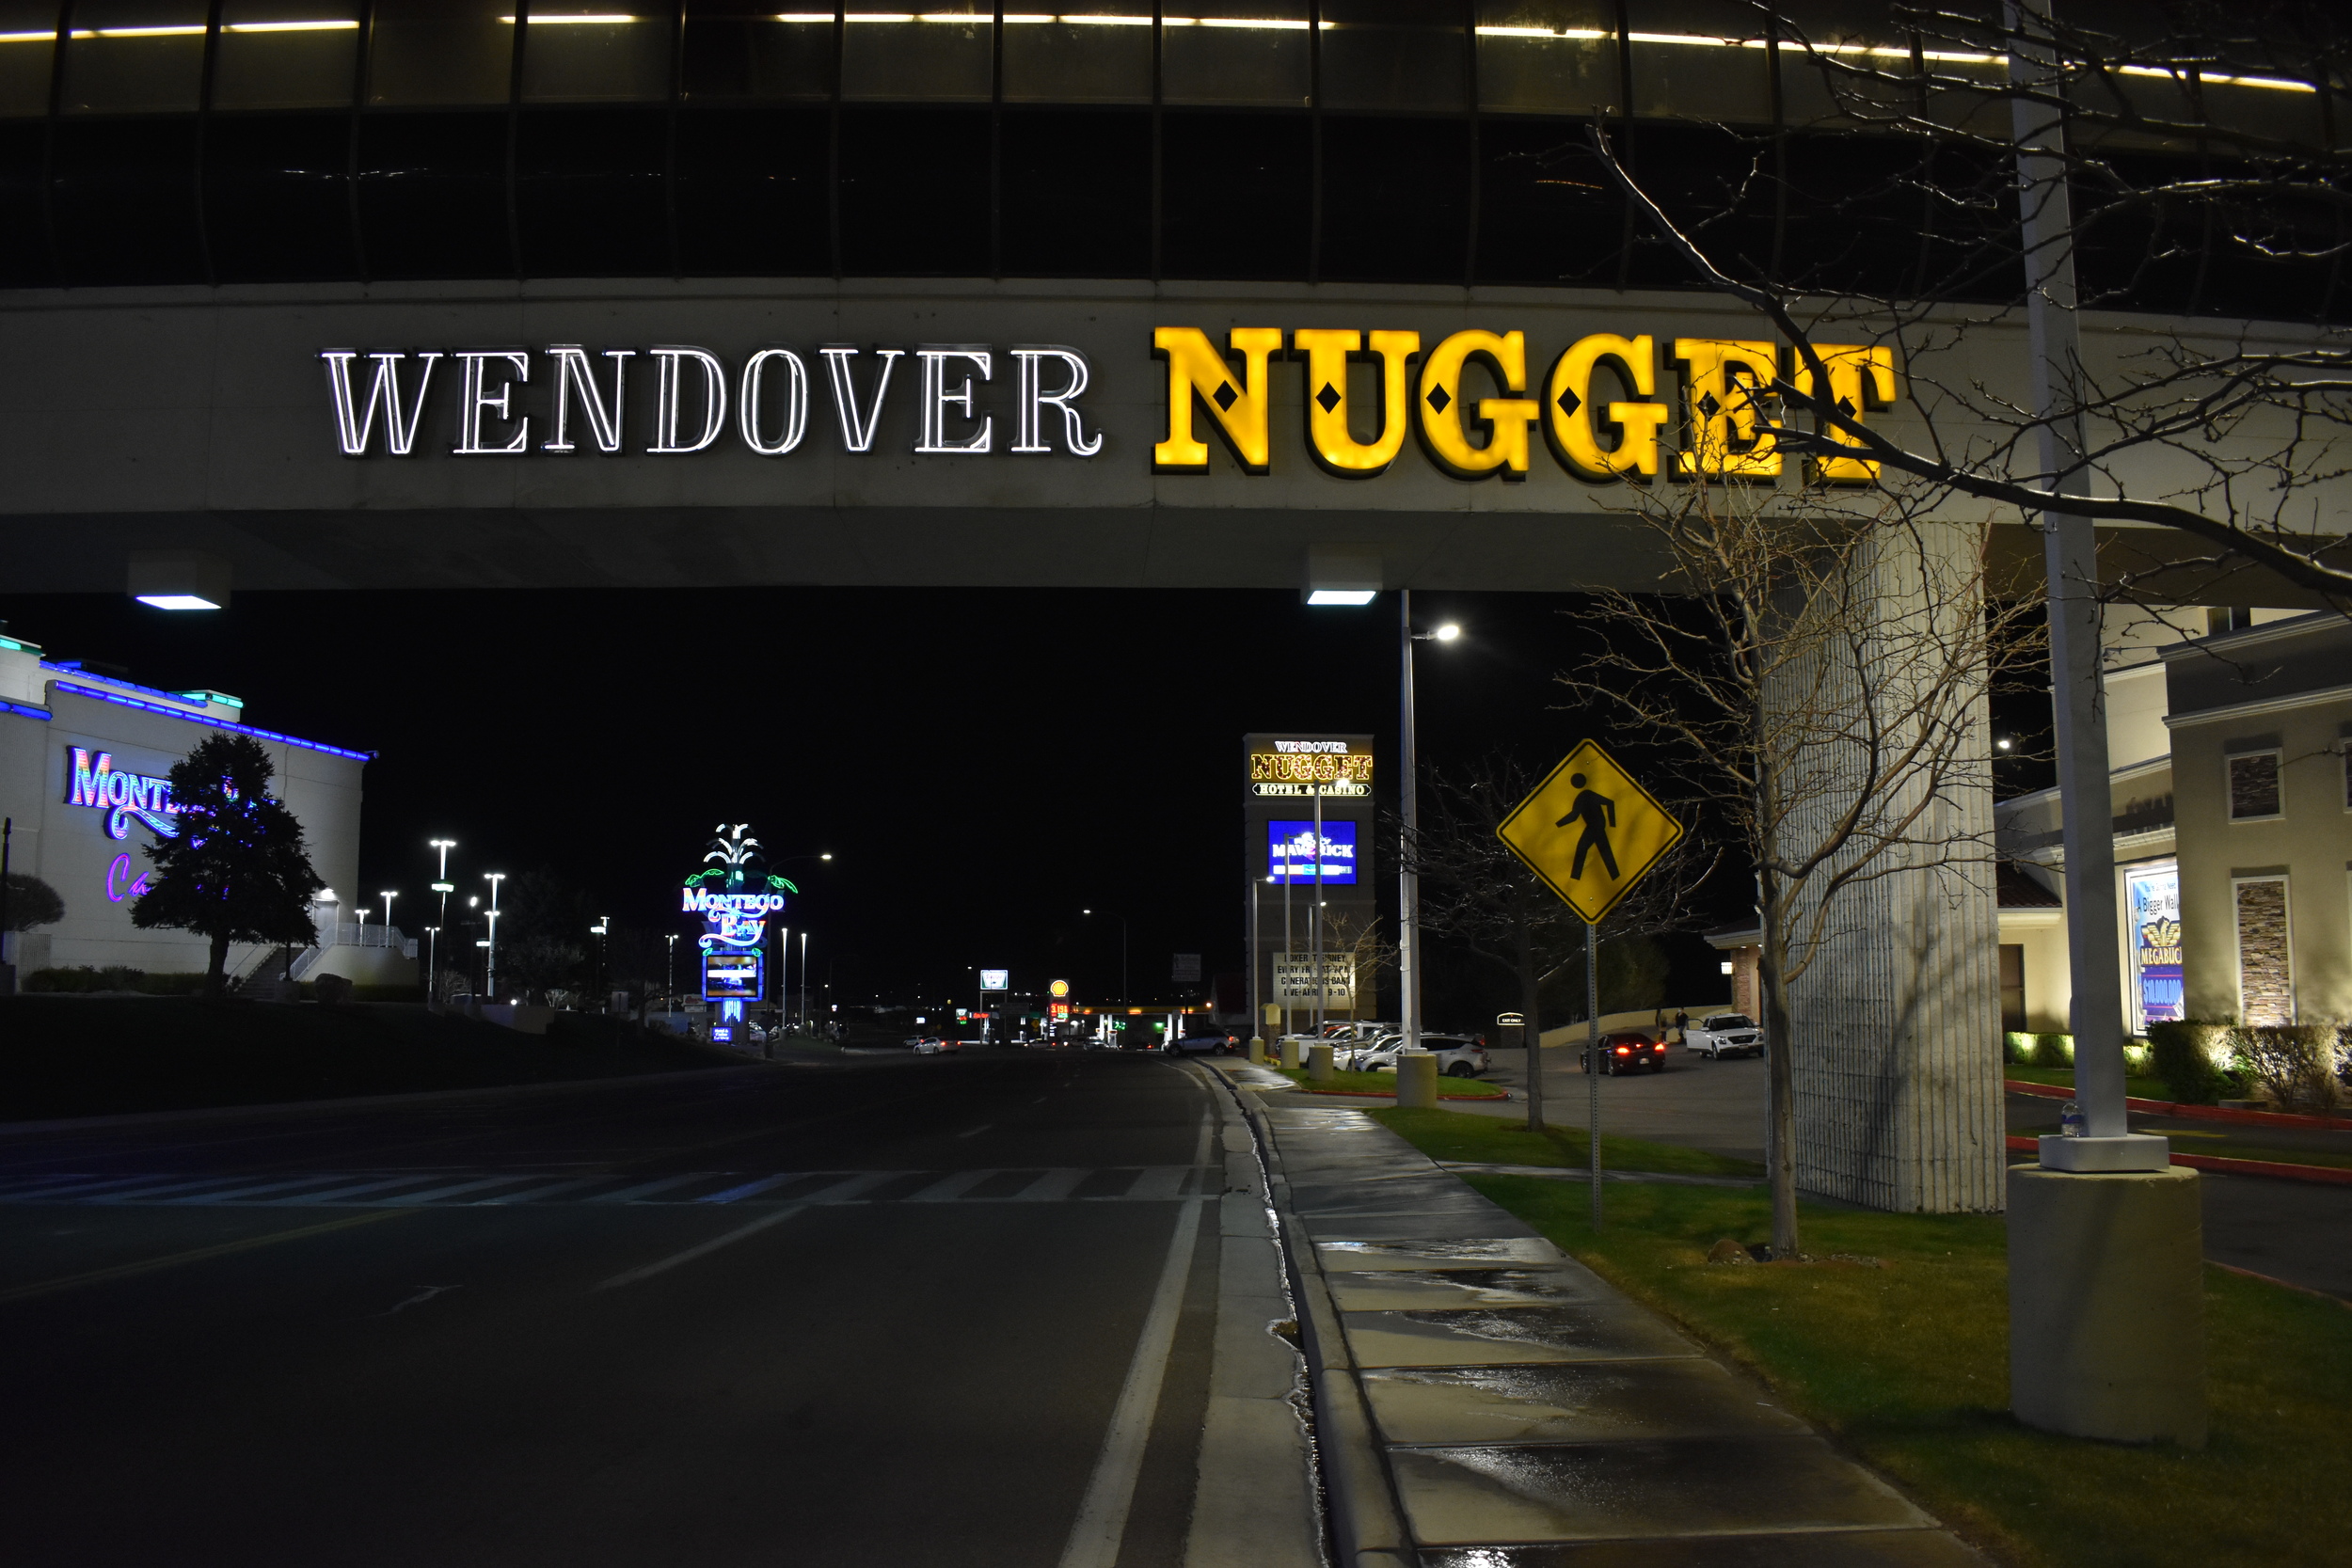 The Wendover Nugget Hotel & Casino wall mounted sign, Wendover, Nevada